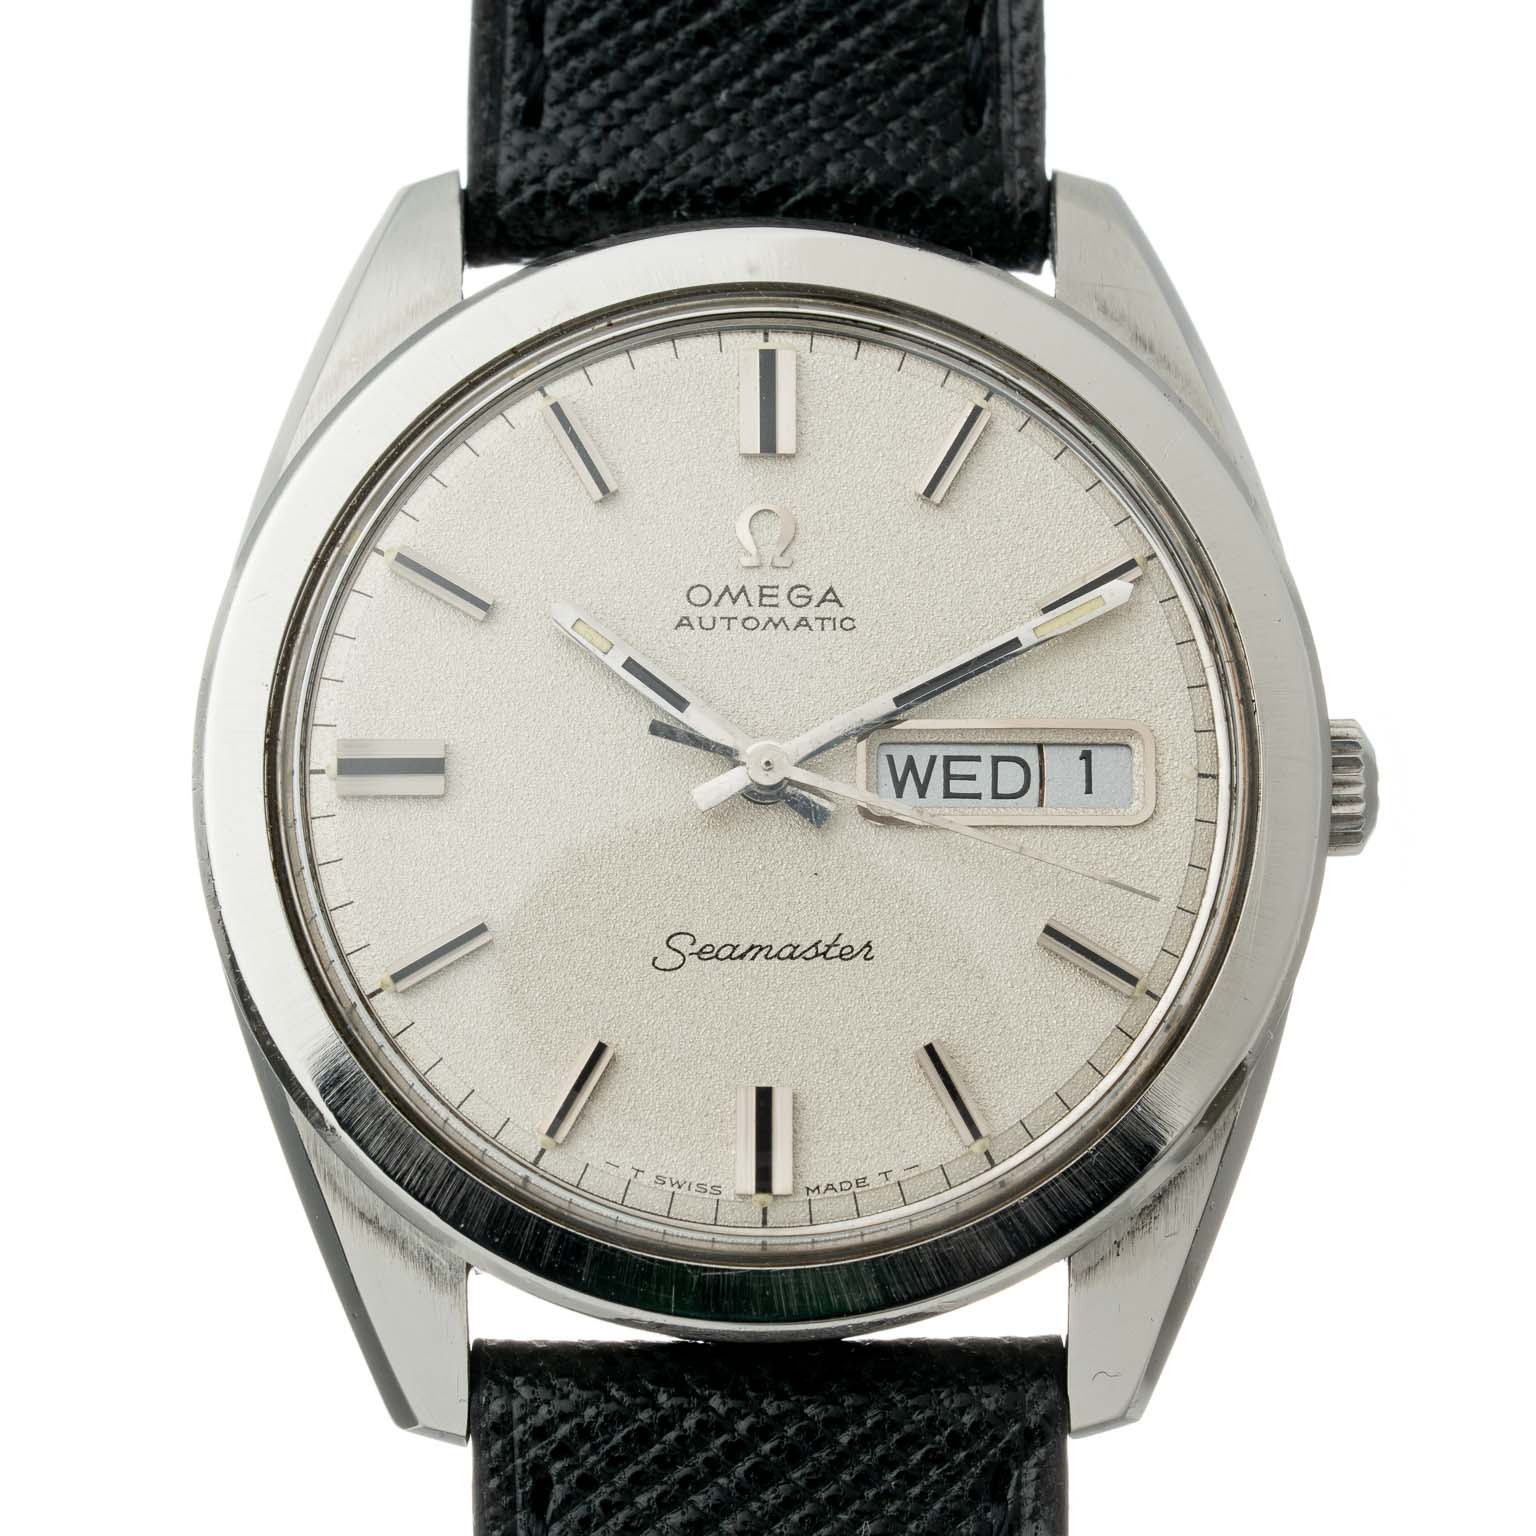 Vintage Omega Seamaster day date with white sparkle dial 168.023 from 1969 watch front